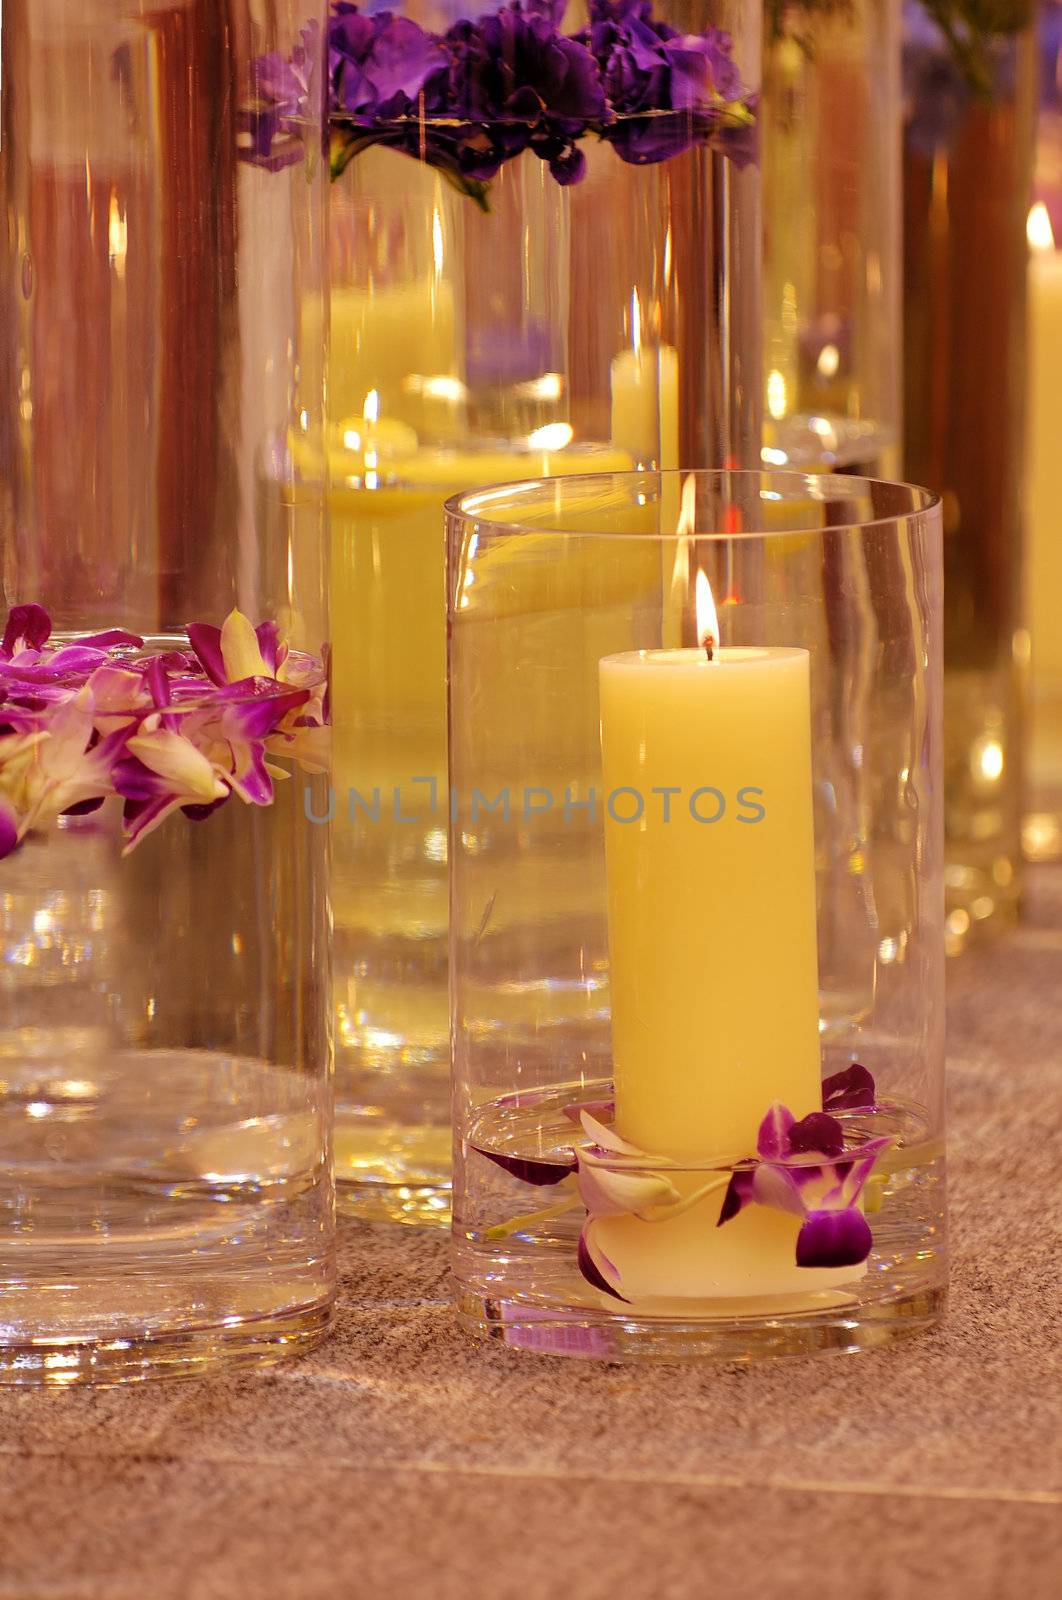 The spa candles and flowers by tito